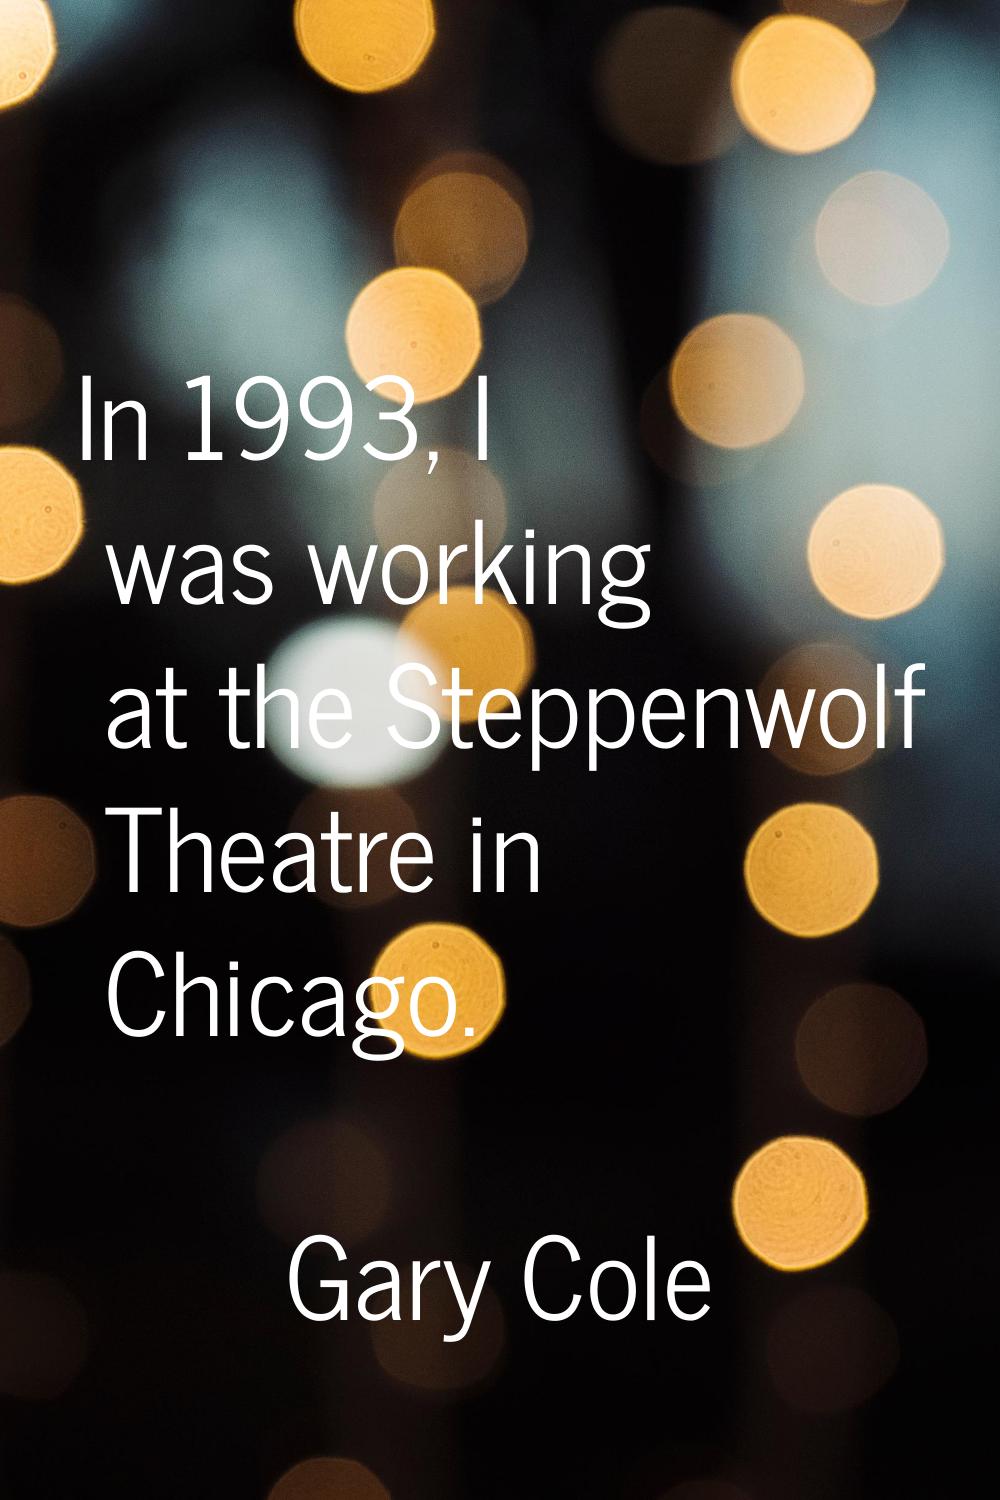 In 1993, I was working at the Steppenwolf Theatre in Chicago.